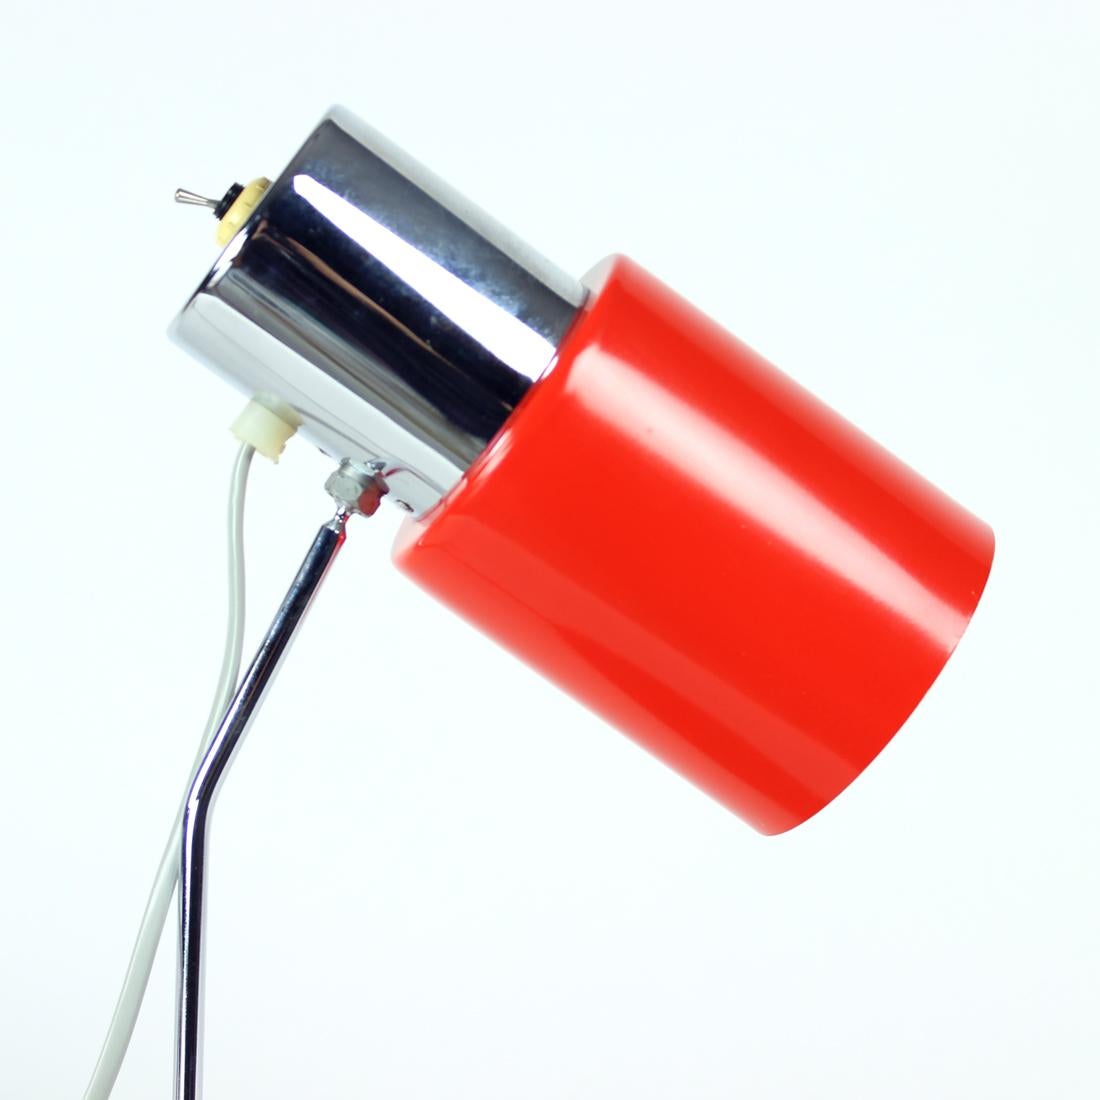 Table Lamp in Chrome and Red Metal, by Josef Hurka for Napako, 1960s For Sale 2